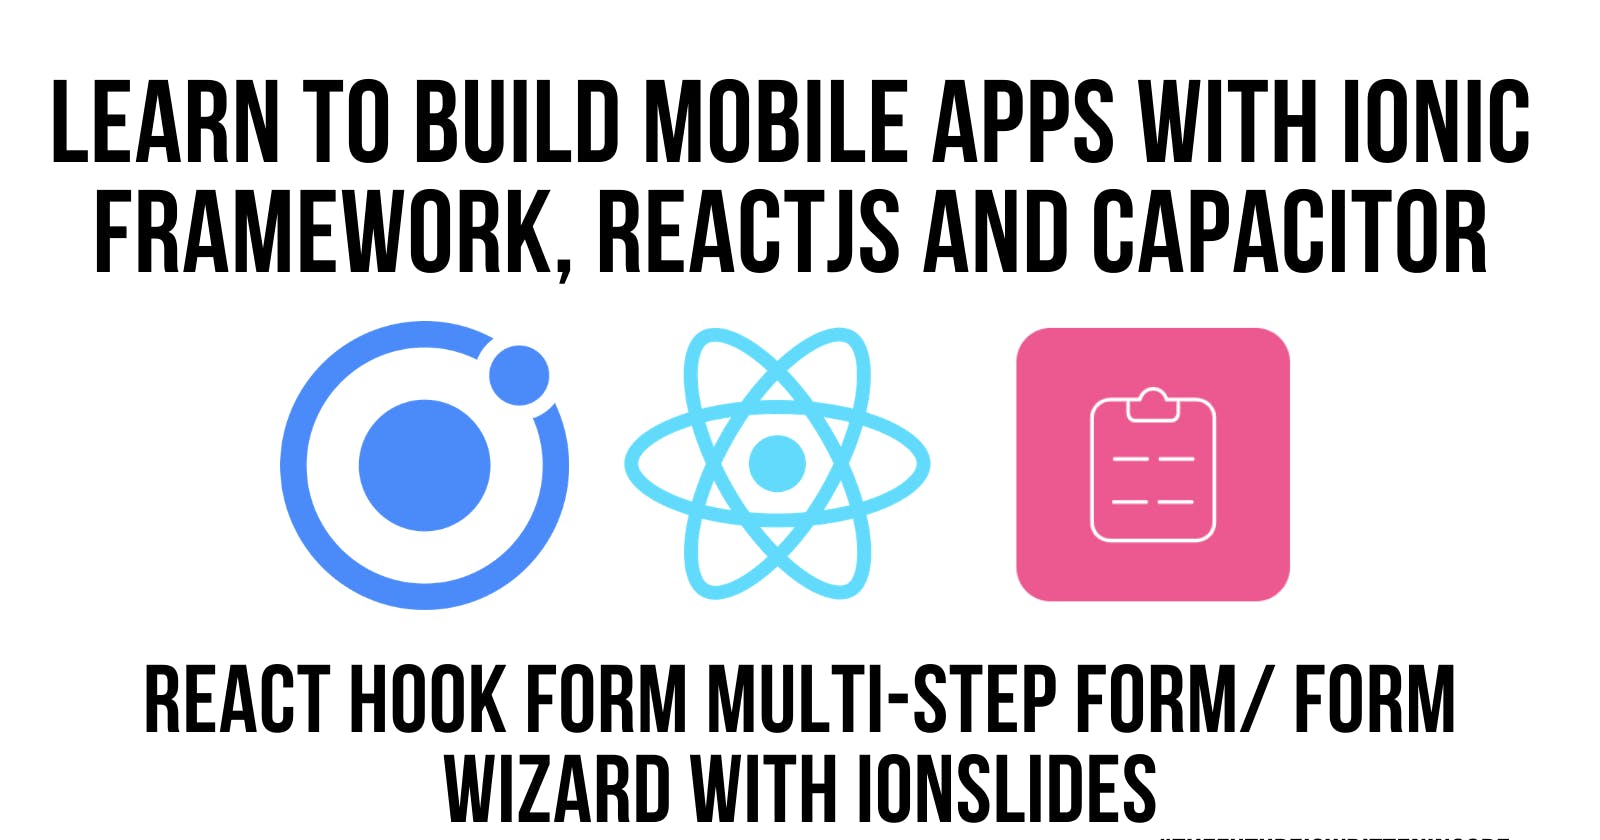 Ionic ReactJS: React Hook Form Multi-Step Form/ Form Wizard with IonSlides